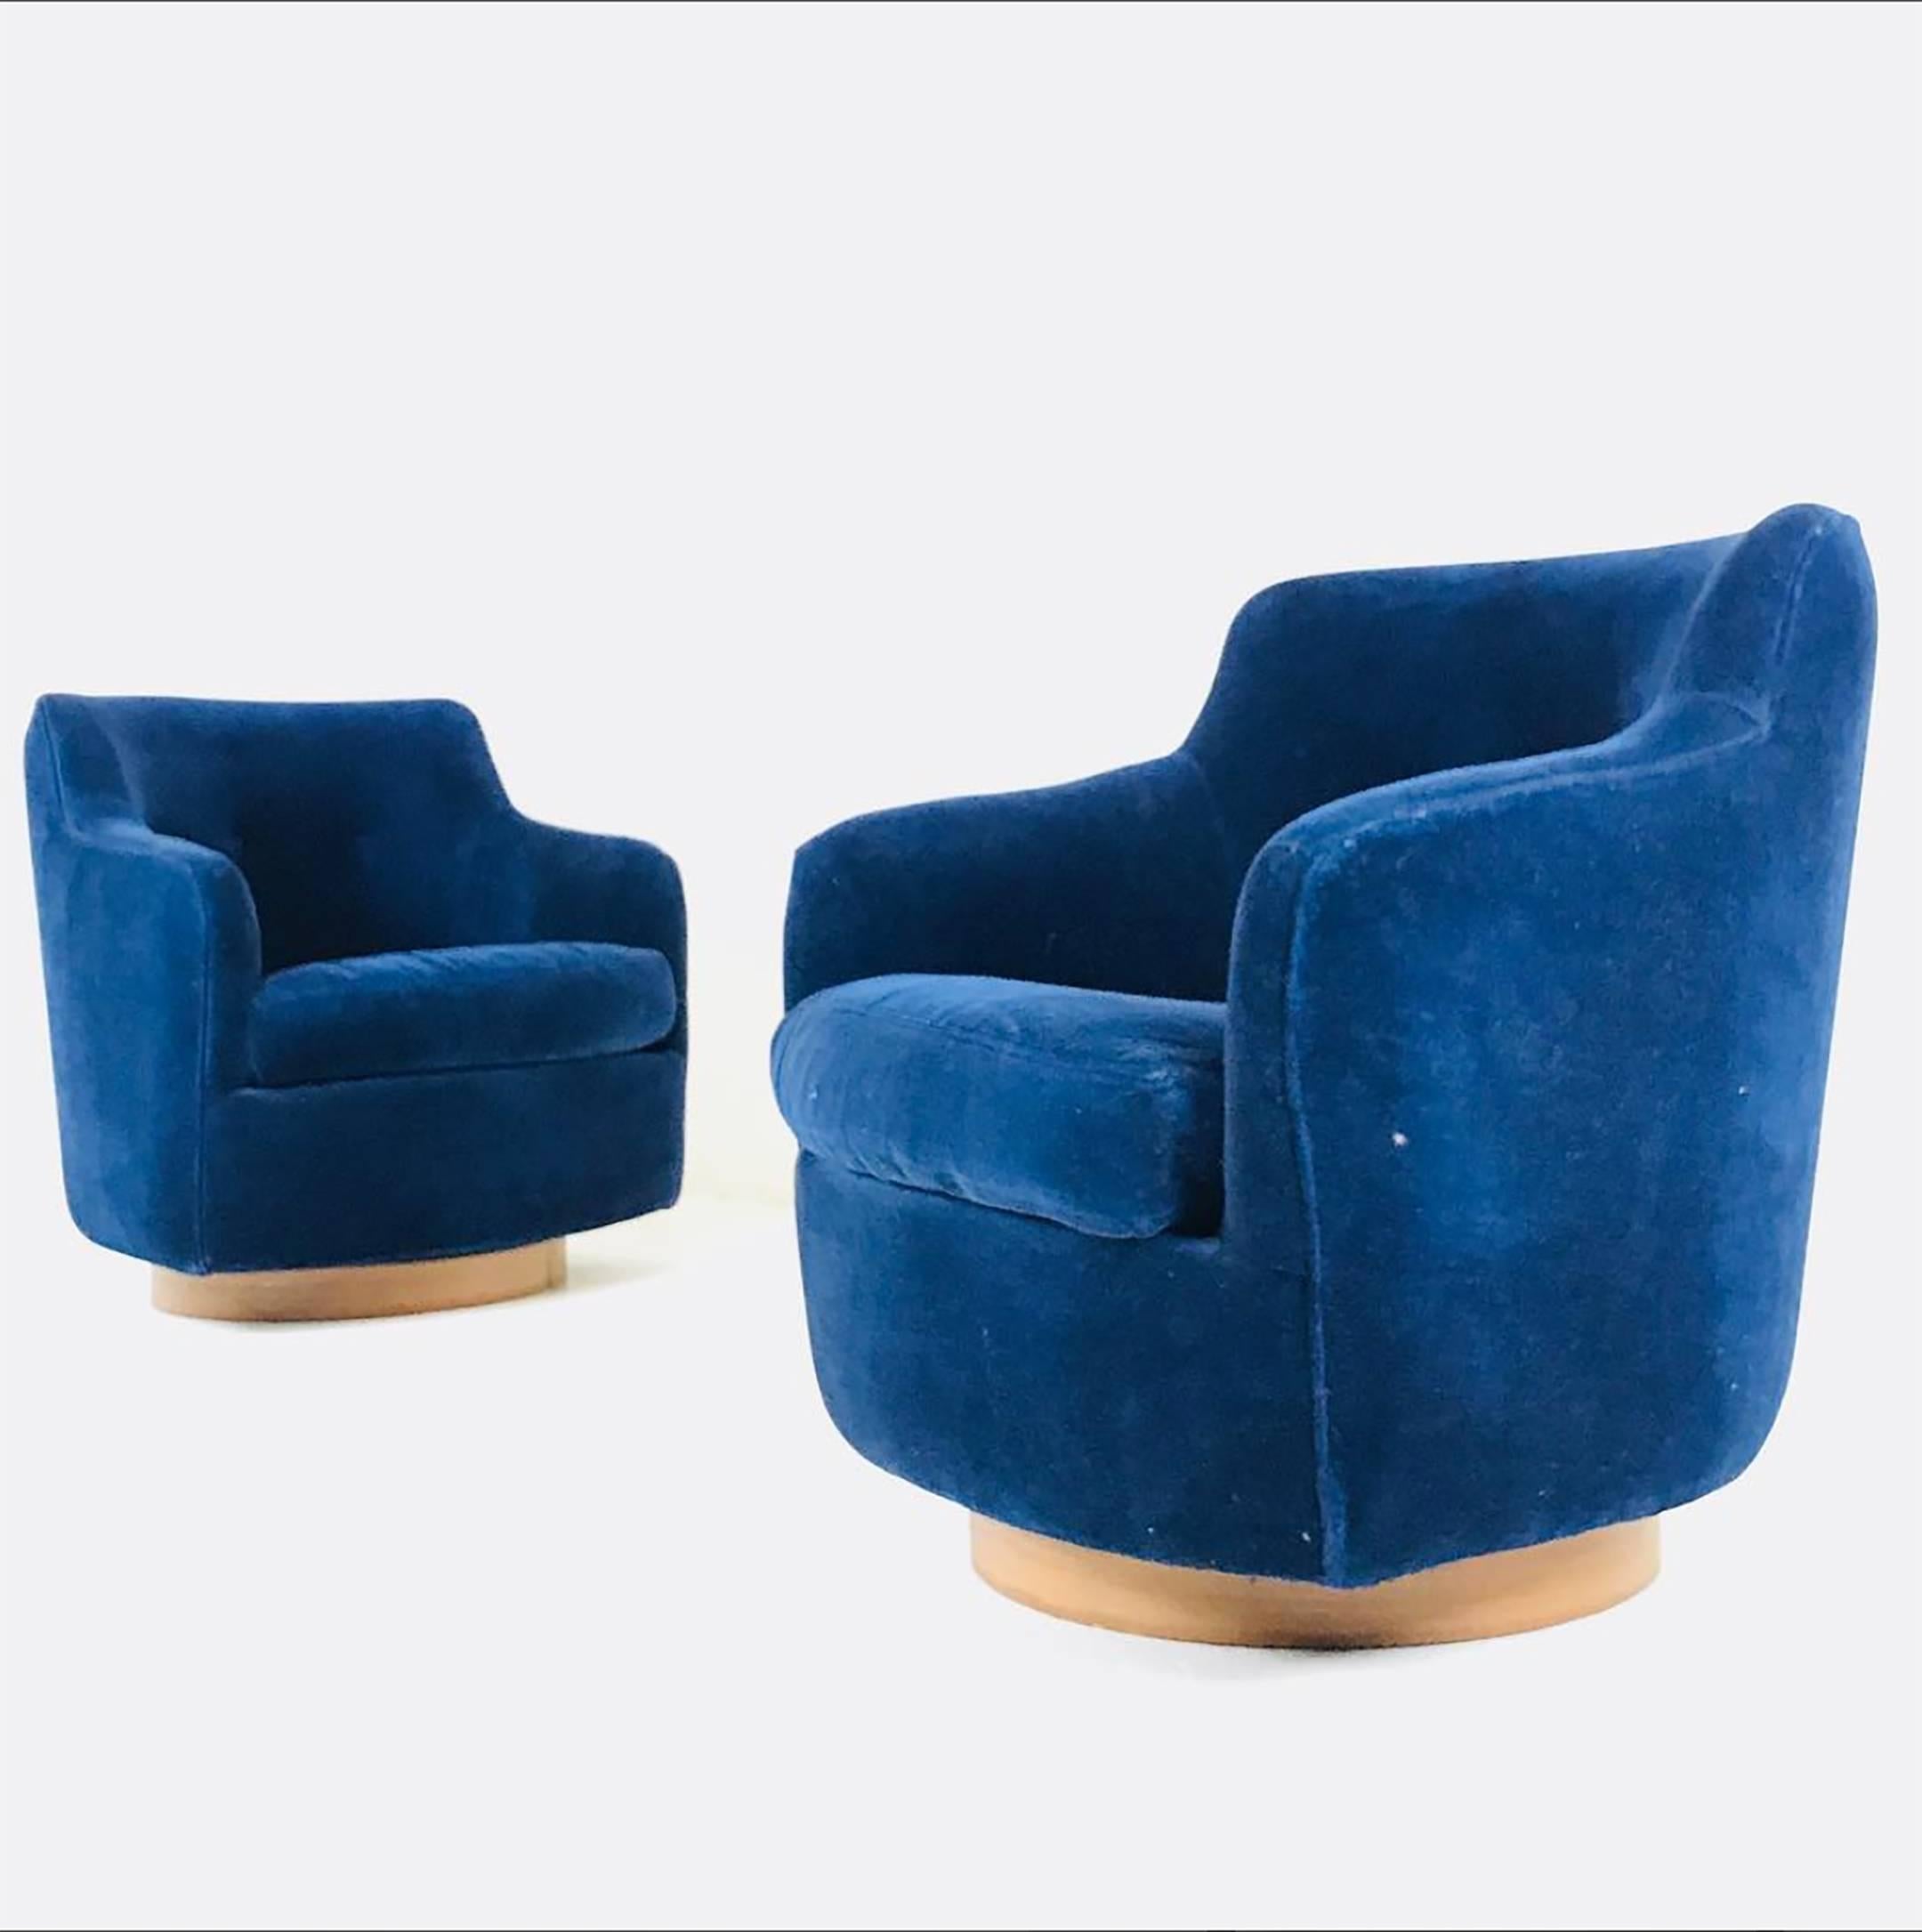 Pair of Milo Baughman swivel chairs in navy blue velvet. Upholstery is in nice vintage condition and can be used as is but new upholstery is recommended, circa 1960s

Dimensions: 27.5